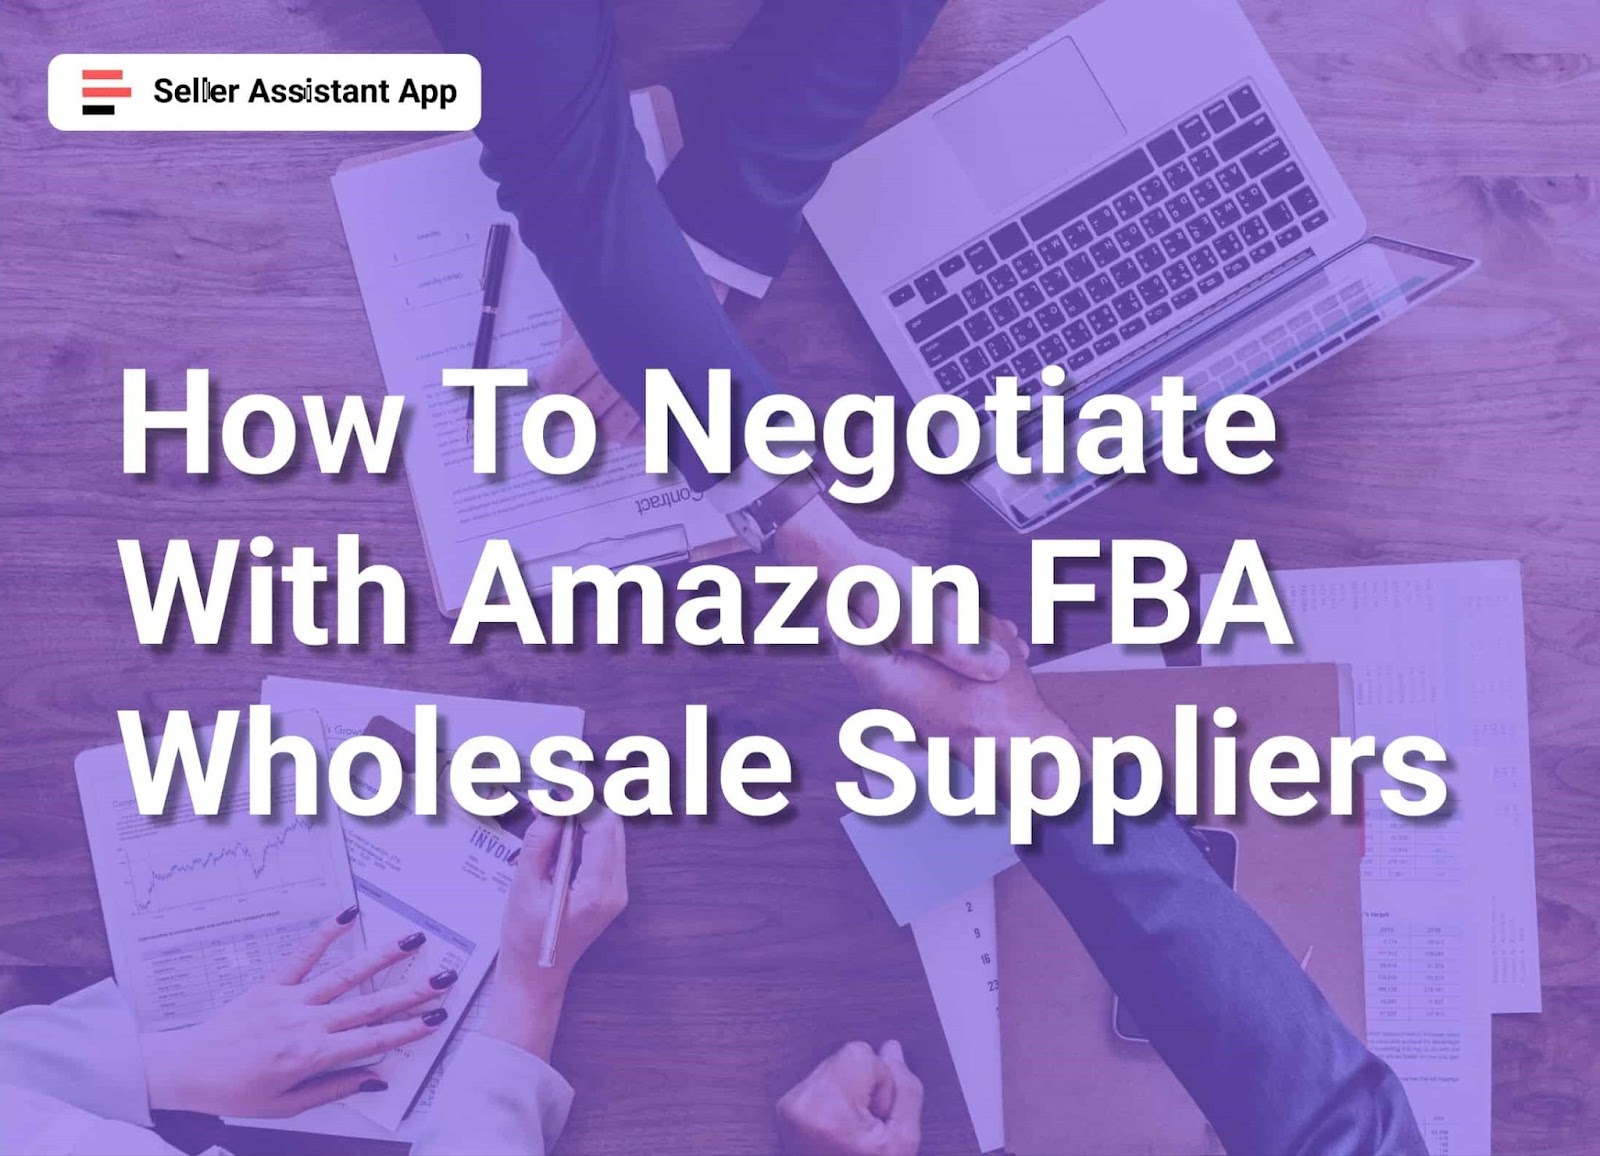 How to Negotiate with Amazon FBA Wholesale Suppliers title